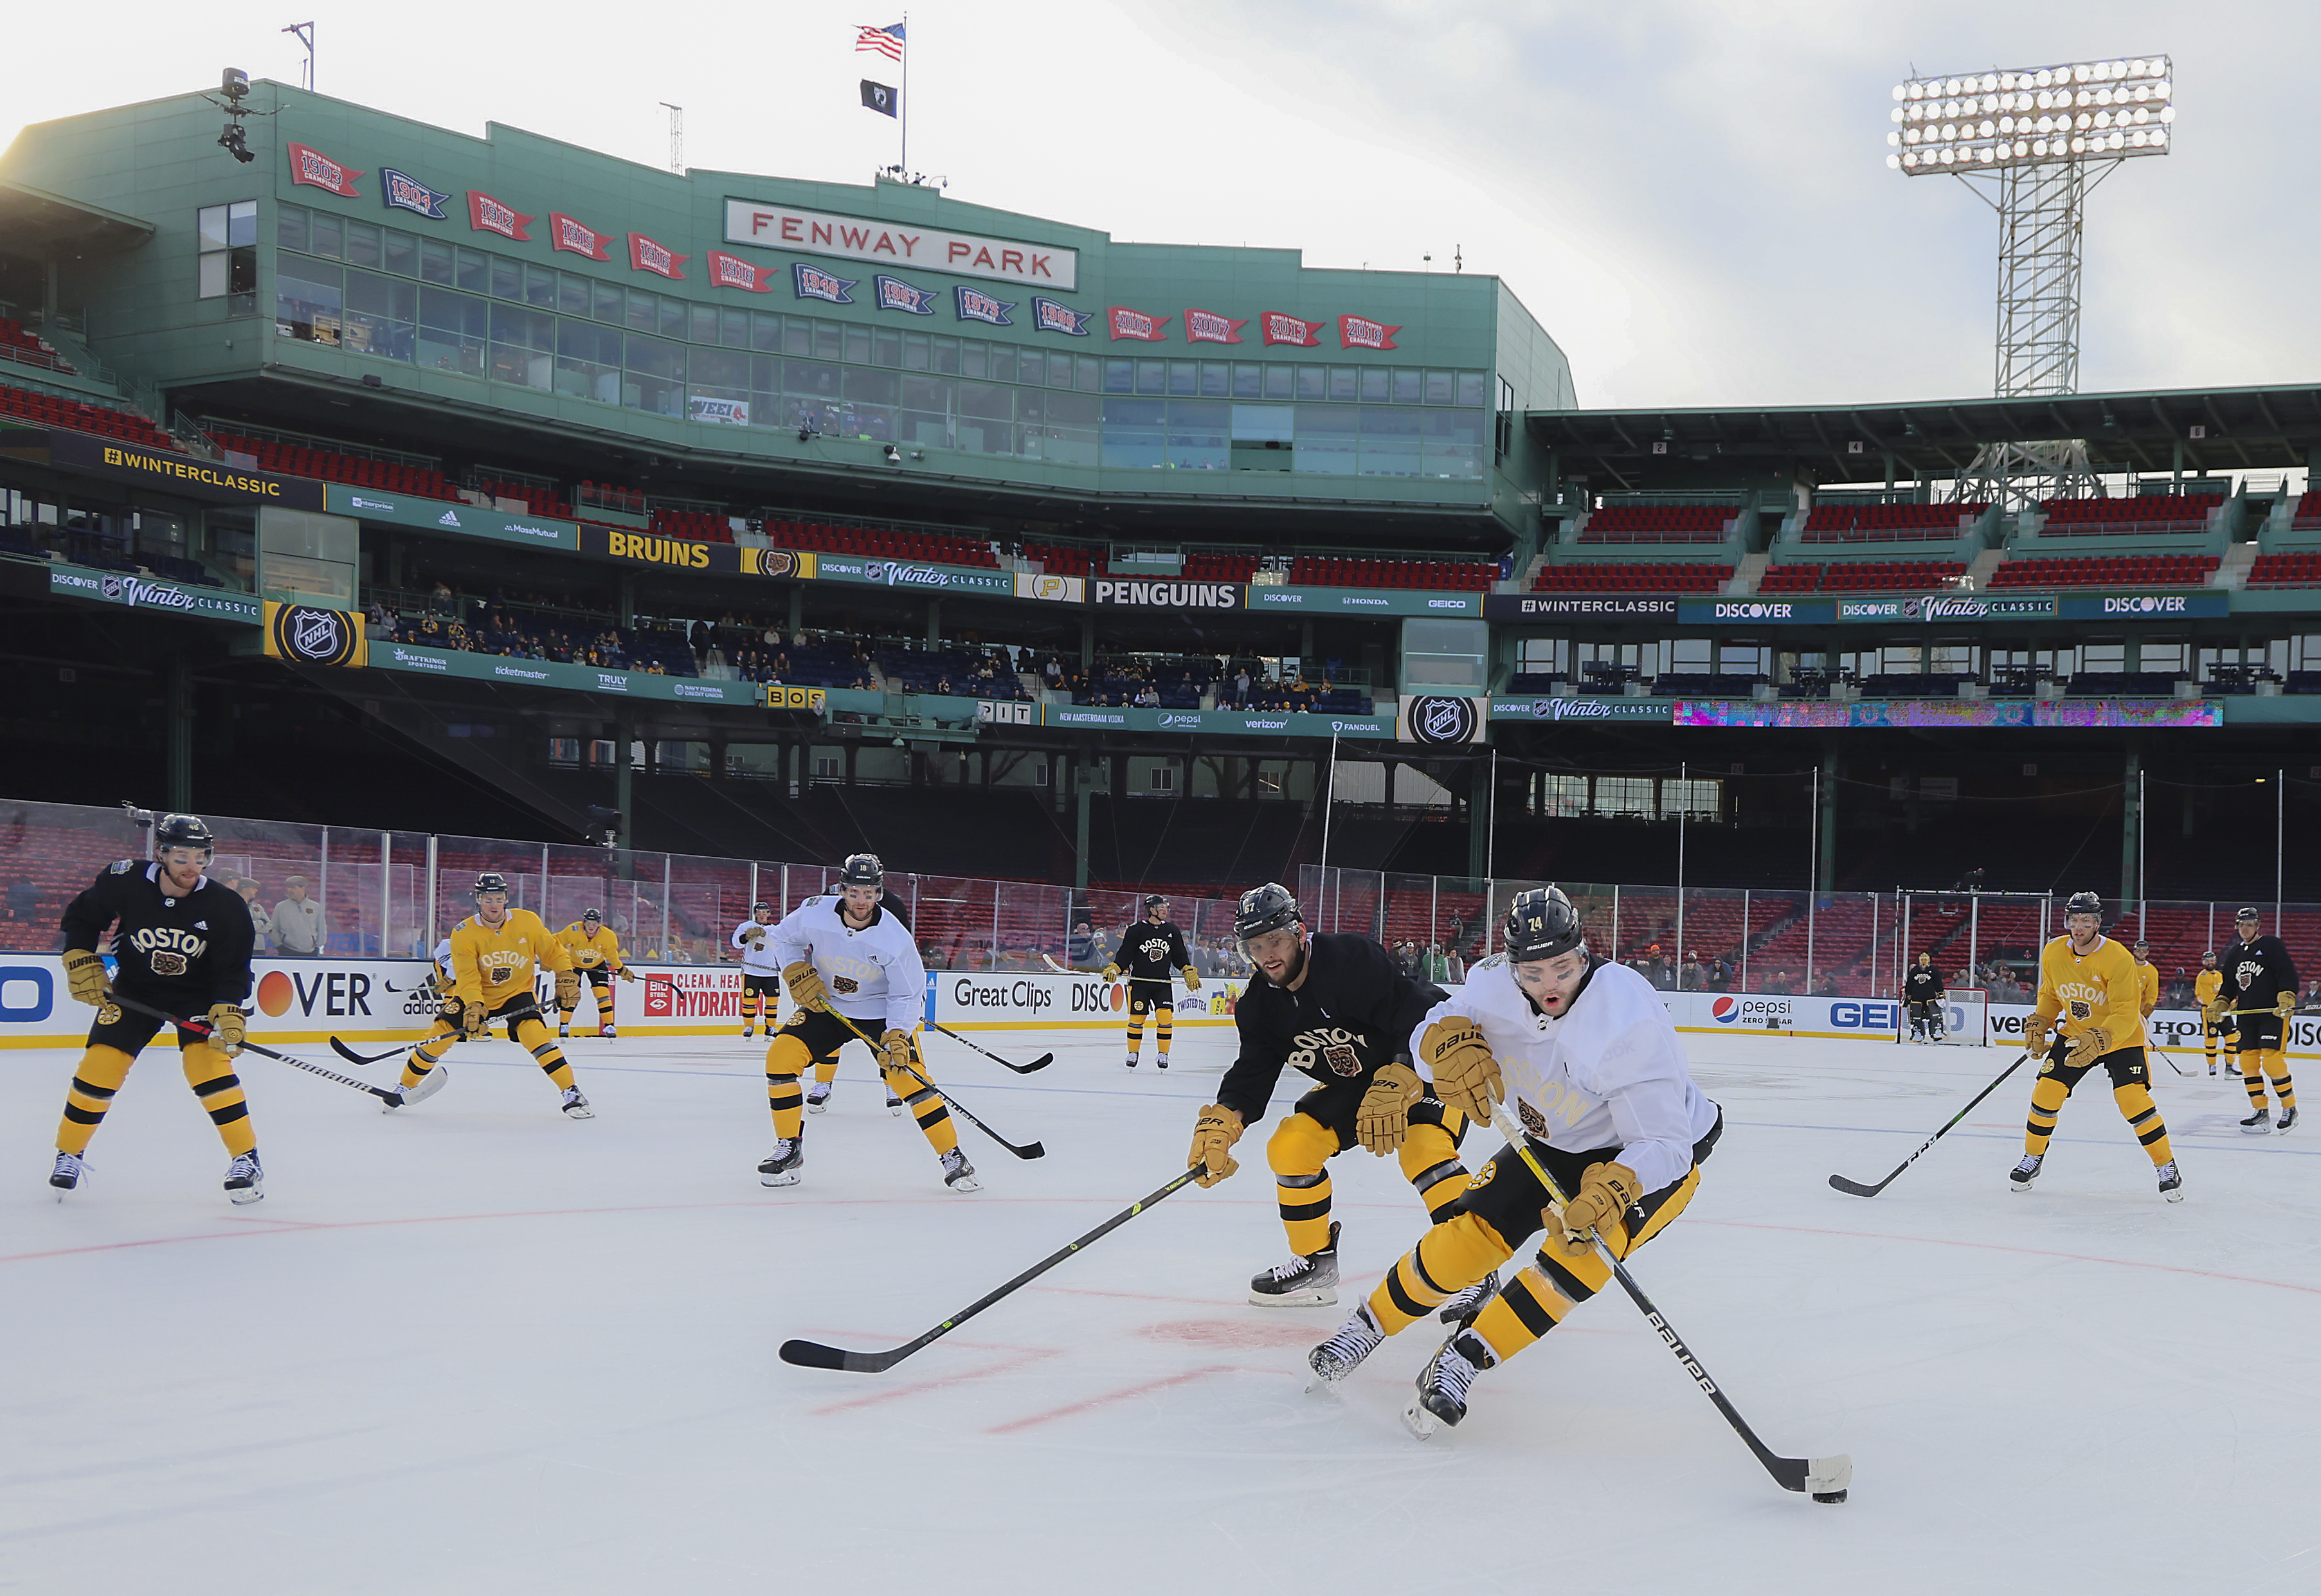 2023 Winter Classic Bruins-Penguins is a black-and-gold rivalry that spans decades